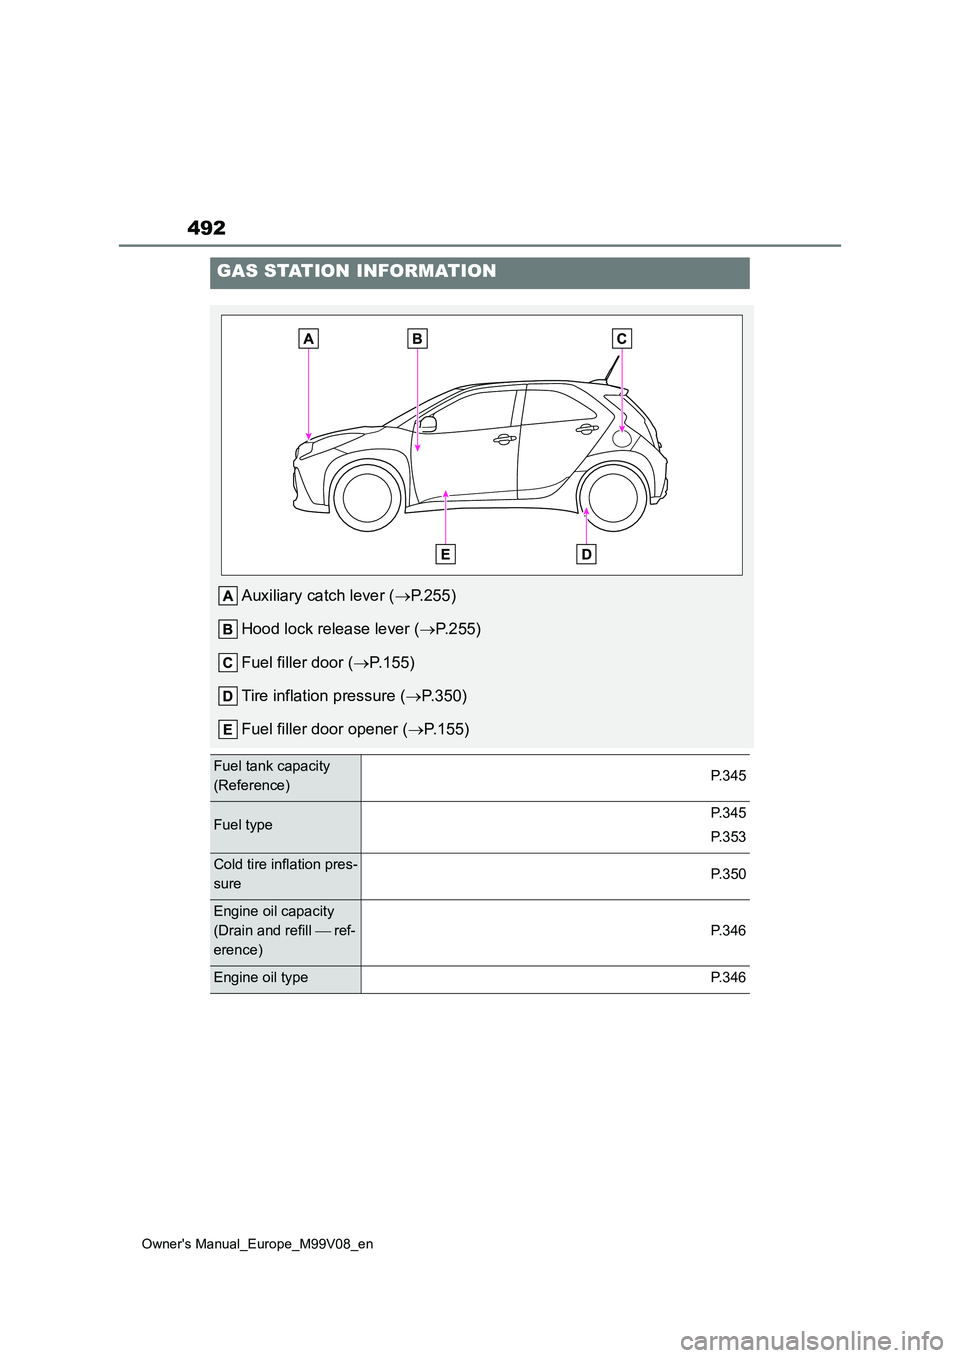 TOYOTA AYGO X 2022  Owners Manual (in English) 492
Owner's Manual_Europe_M99V08_en
GAS STATION INFORMATION
Auxiliary catch lever (P.255) 
Hood lock release lever ( P.255) 
Fuel filler door ( P.155) 
Tire inflation pressure ( P.350)